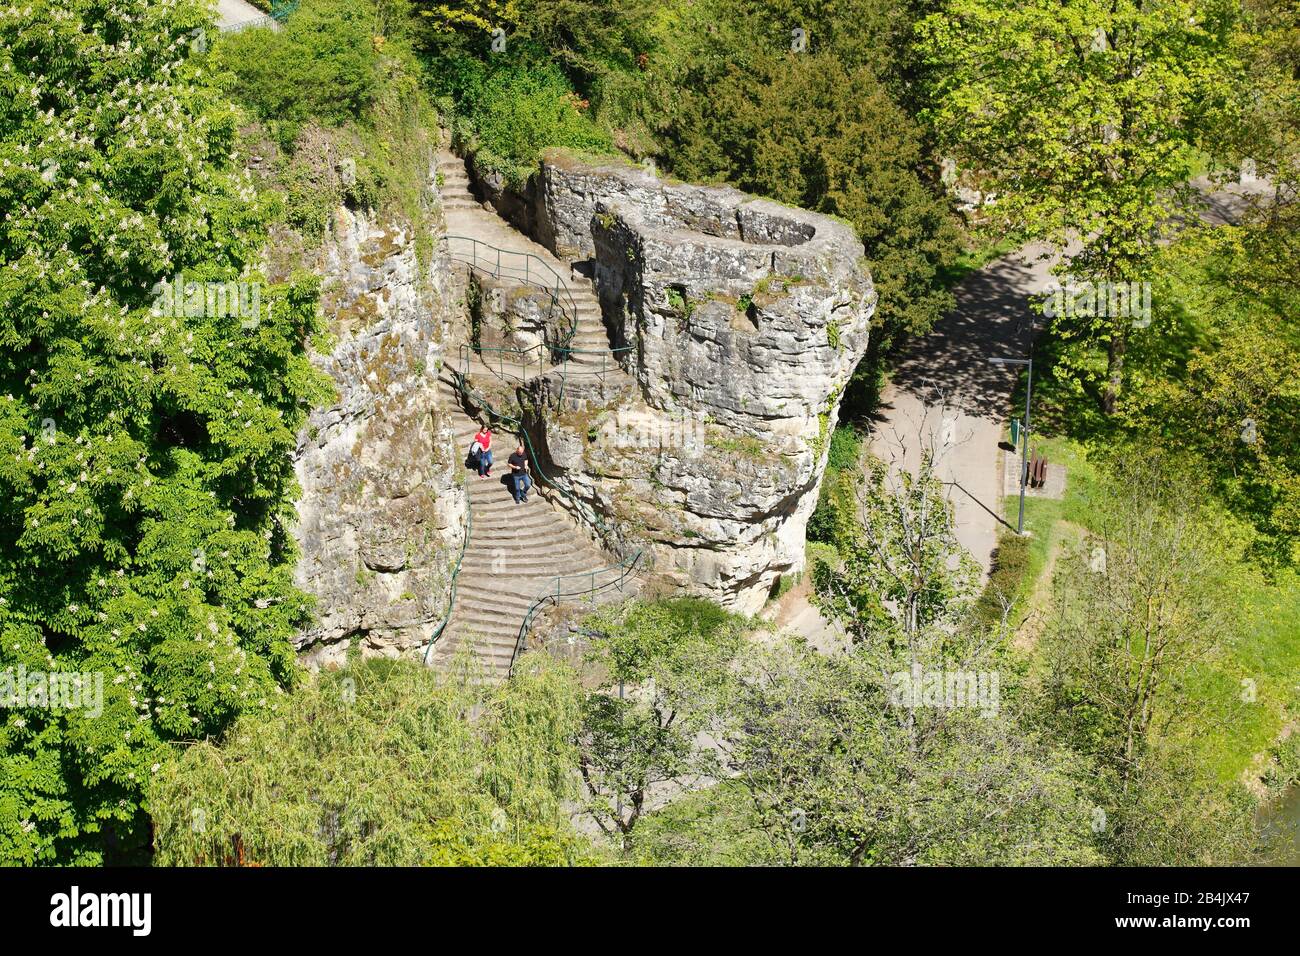 Fortress remains in the Petrusse valley, Luxembourg, Europe Stock Photo